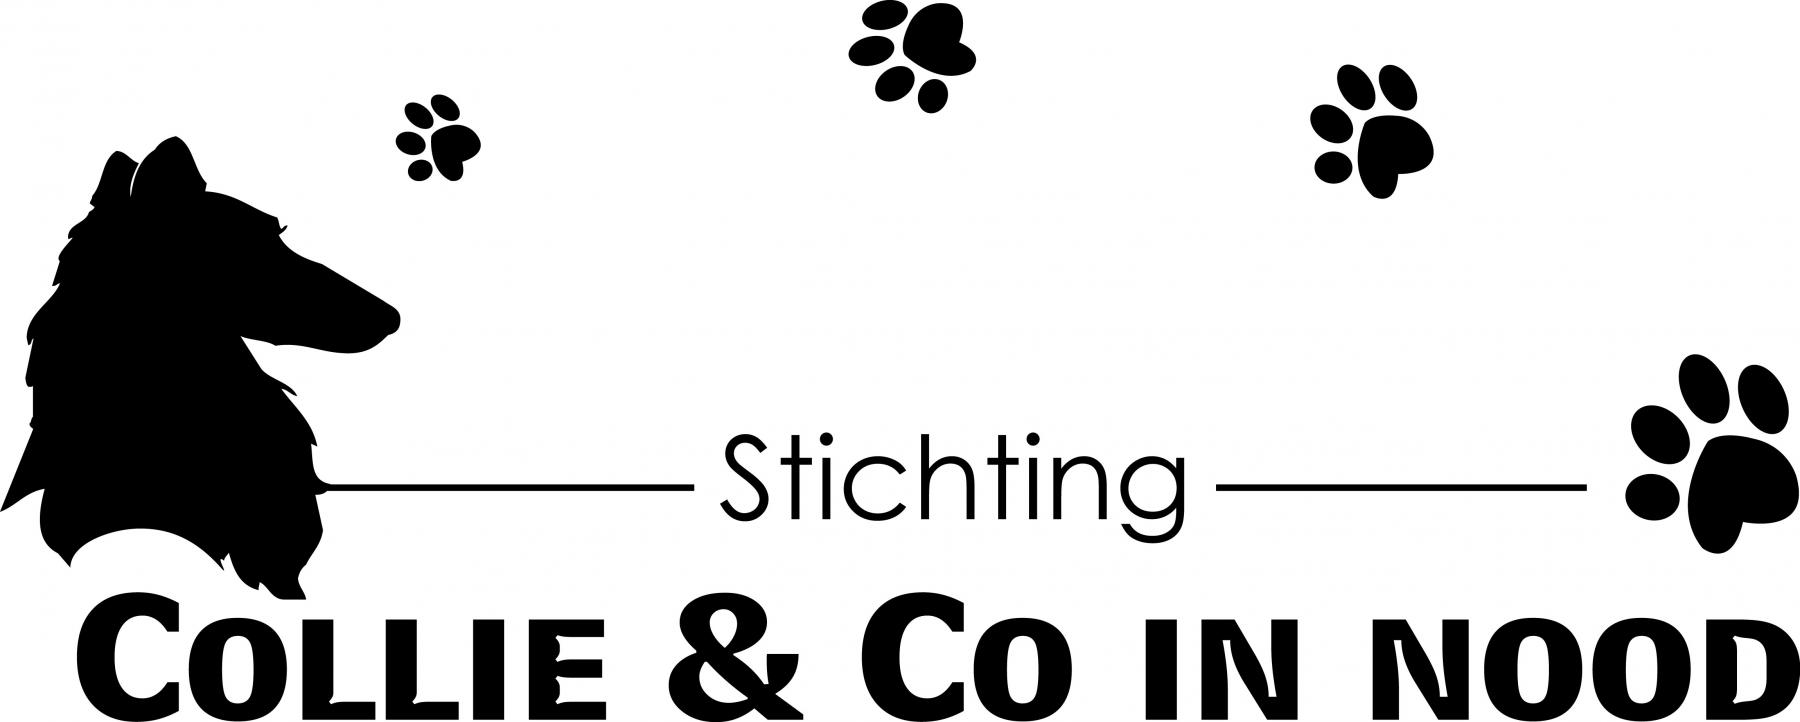 STICHTING COLLIE & CO IN NOOD